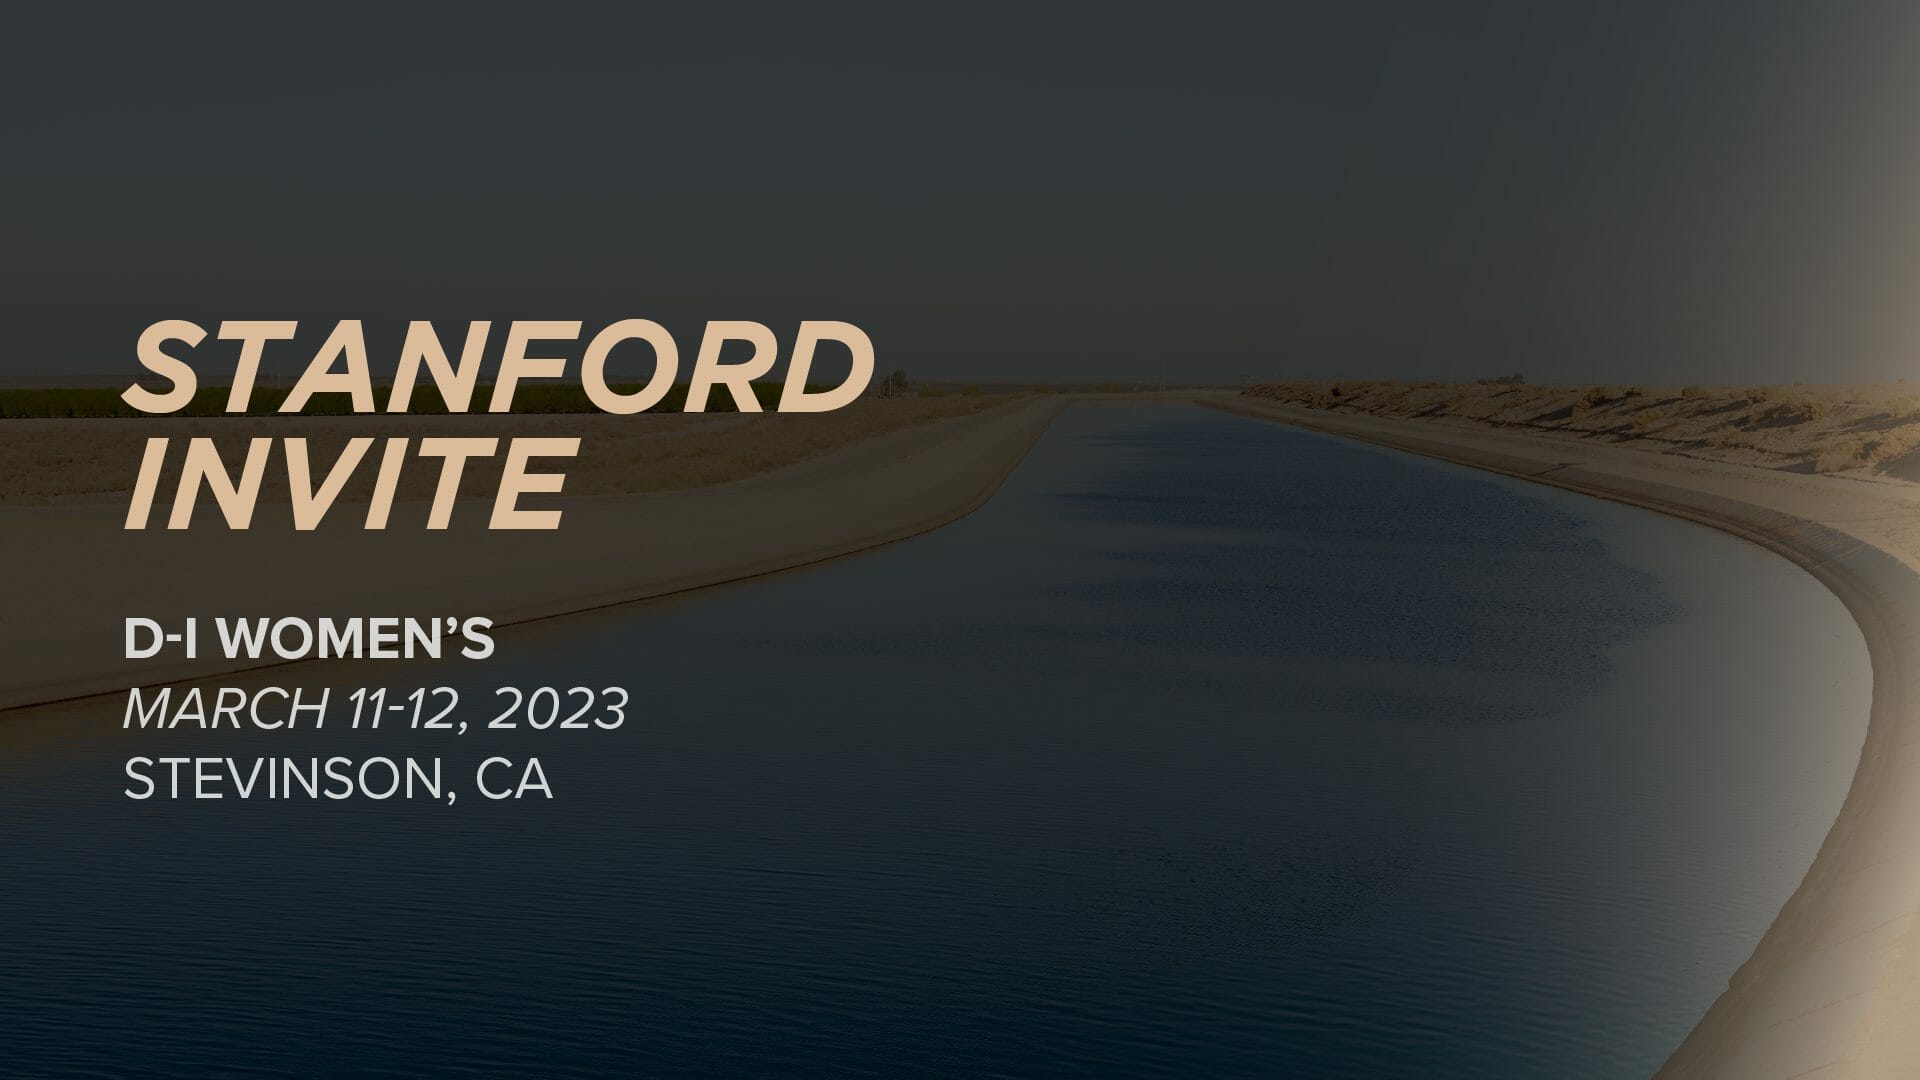 2023 Stanford Invite (Women's) Event News, Stats, Schedule & More